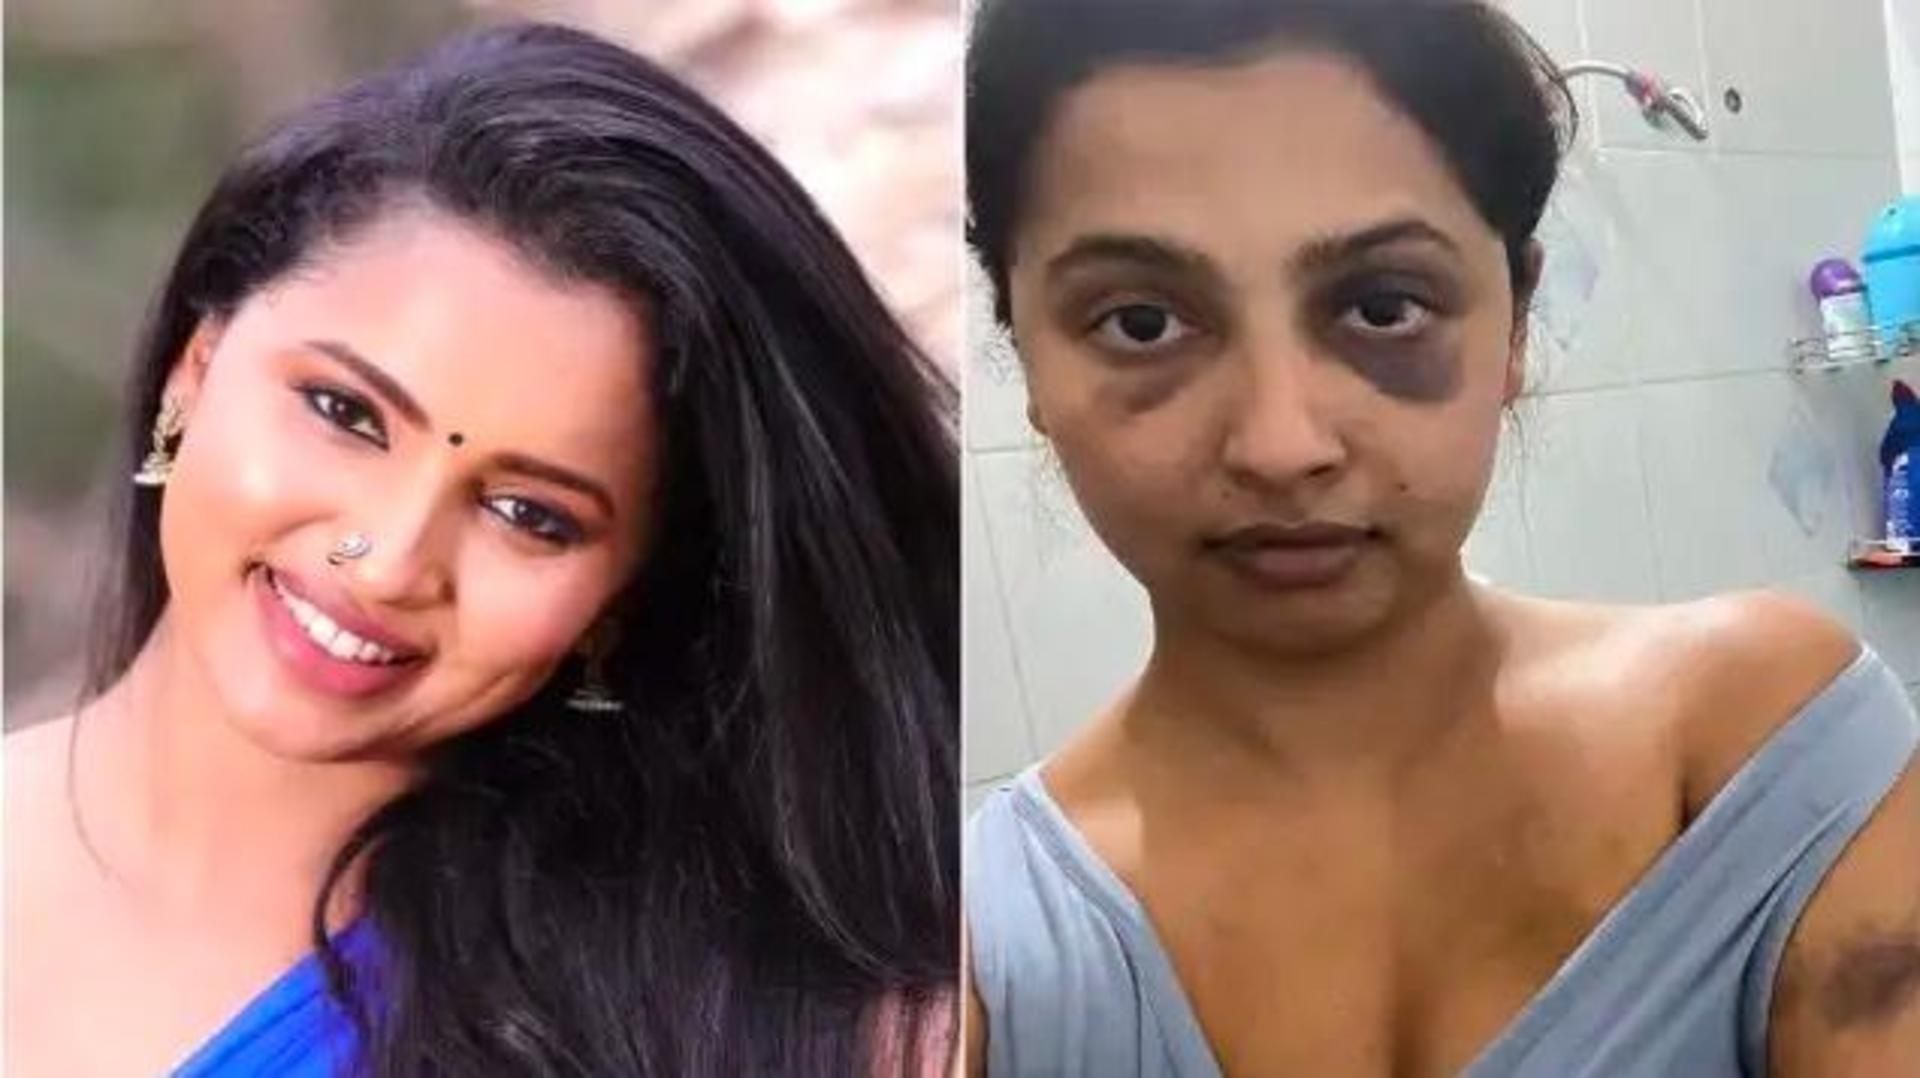 Tamil actor Anicka accuses ex-boyfriend of assault, shares disturbing pictures